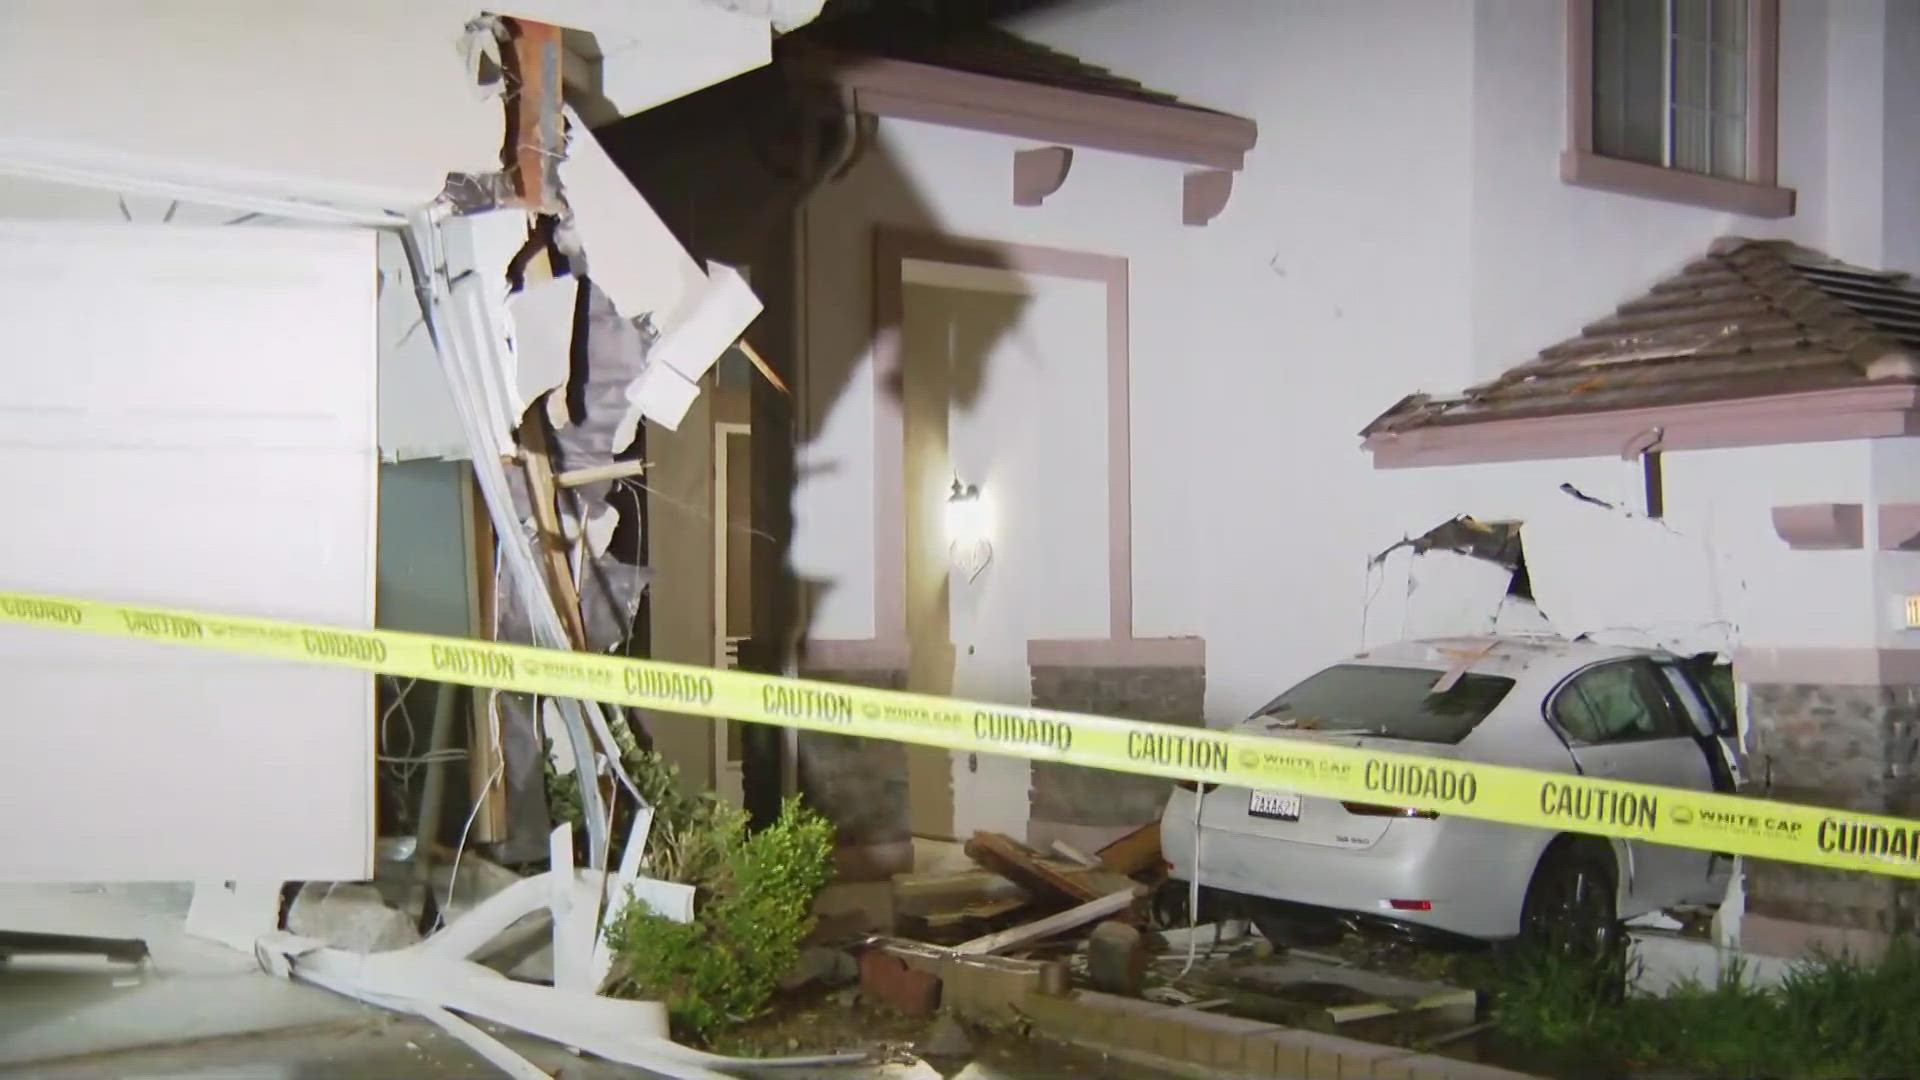 Driver Injured After Crashing Through Second Story of Calif. Home